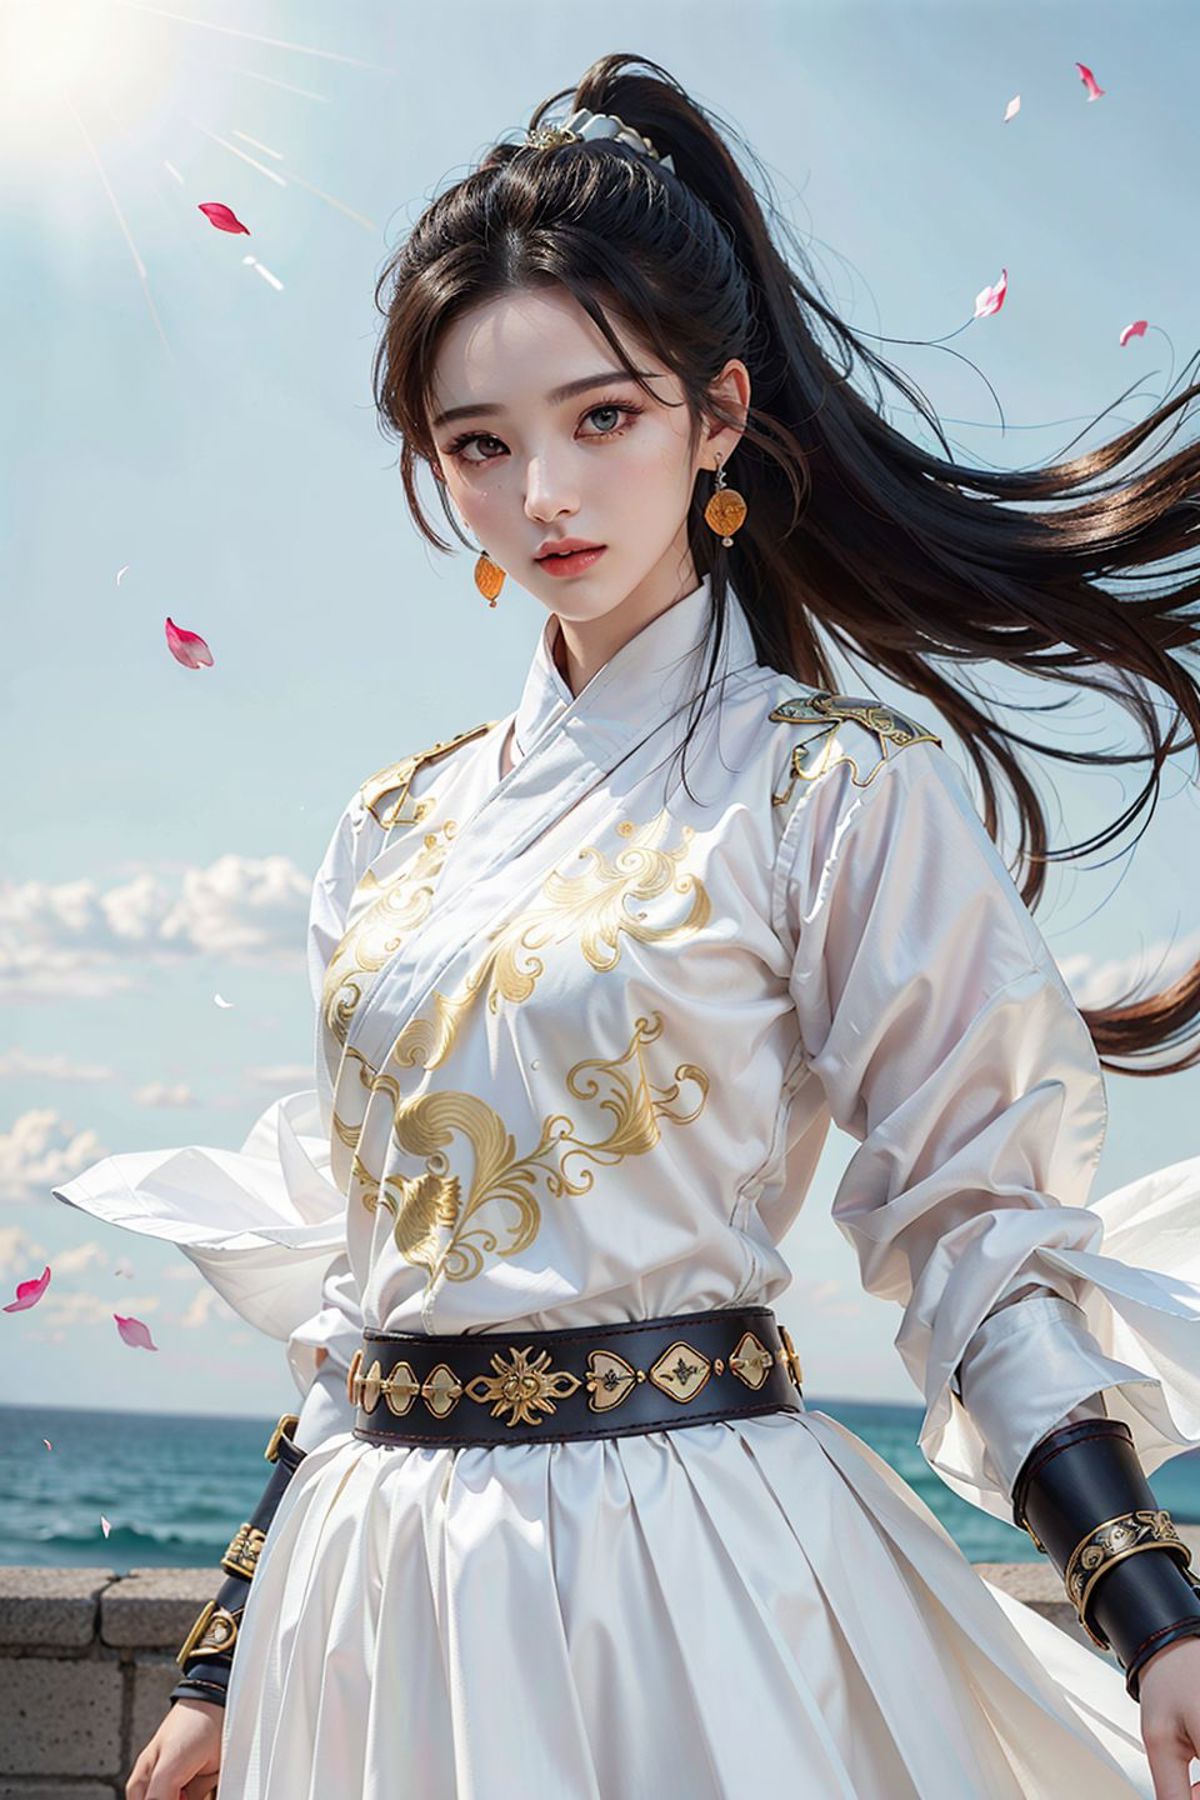 Chinese clothing, Feiyu outfit飞鱼服 image by ylnnn